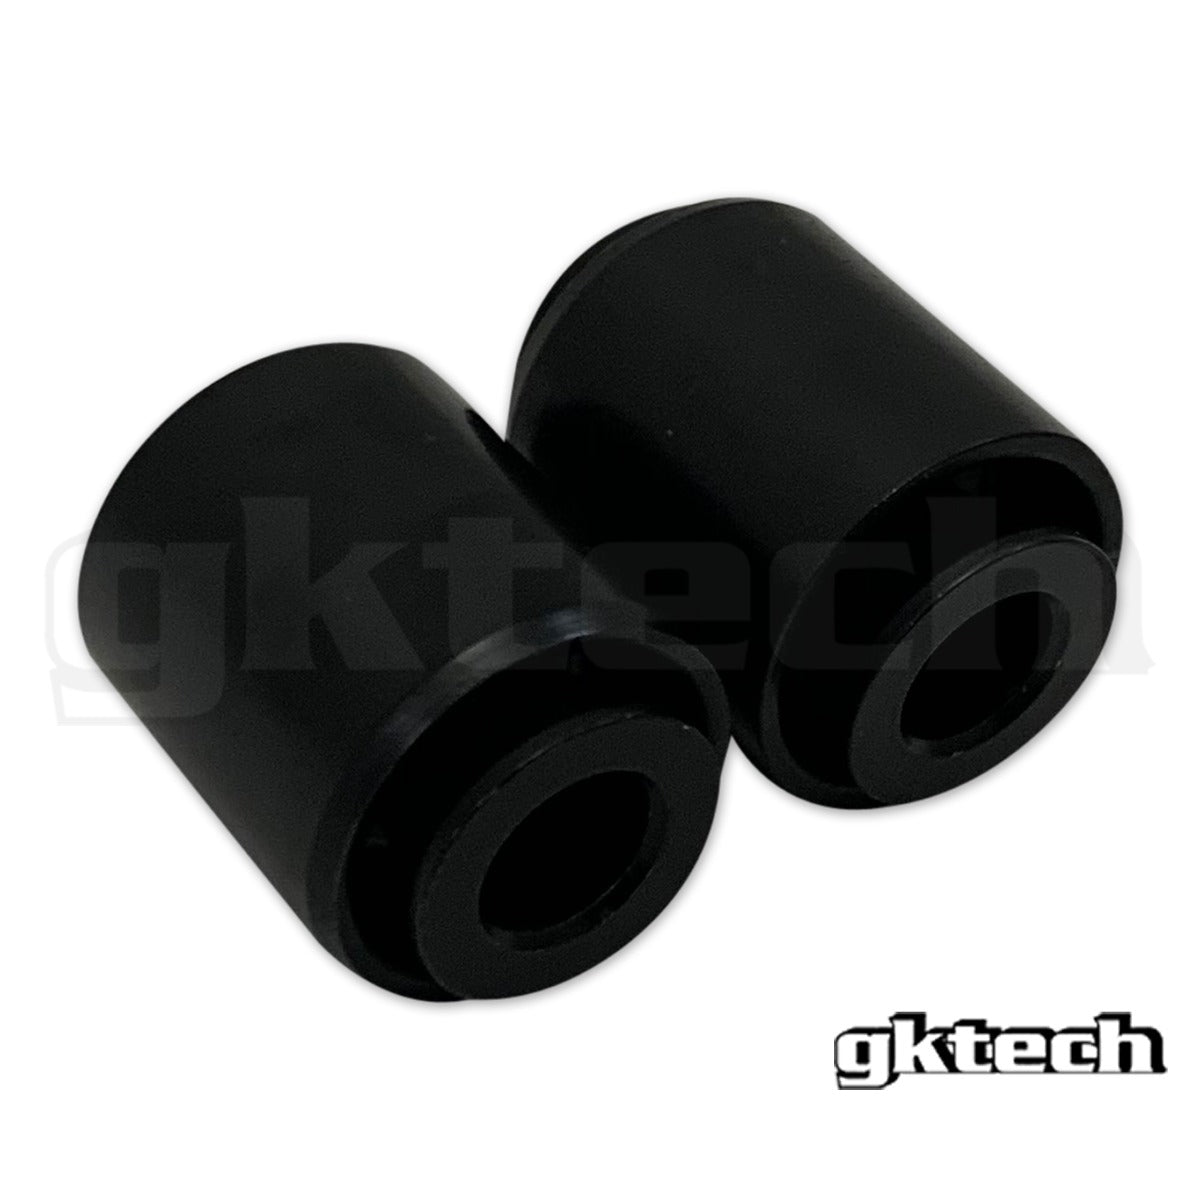 S/R Chassis OEM Rear Knuckle Spherical Bushes (PAIR)